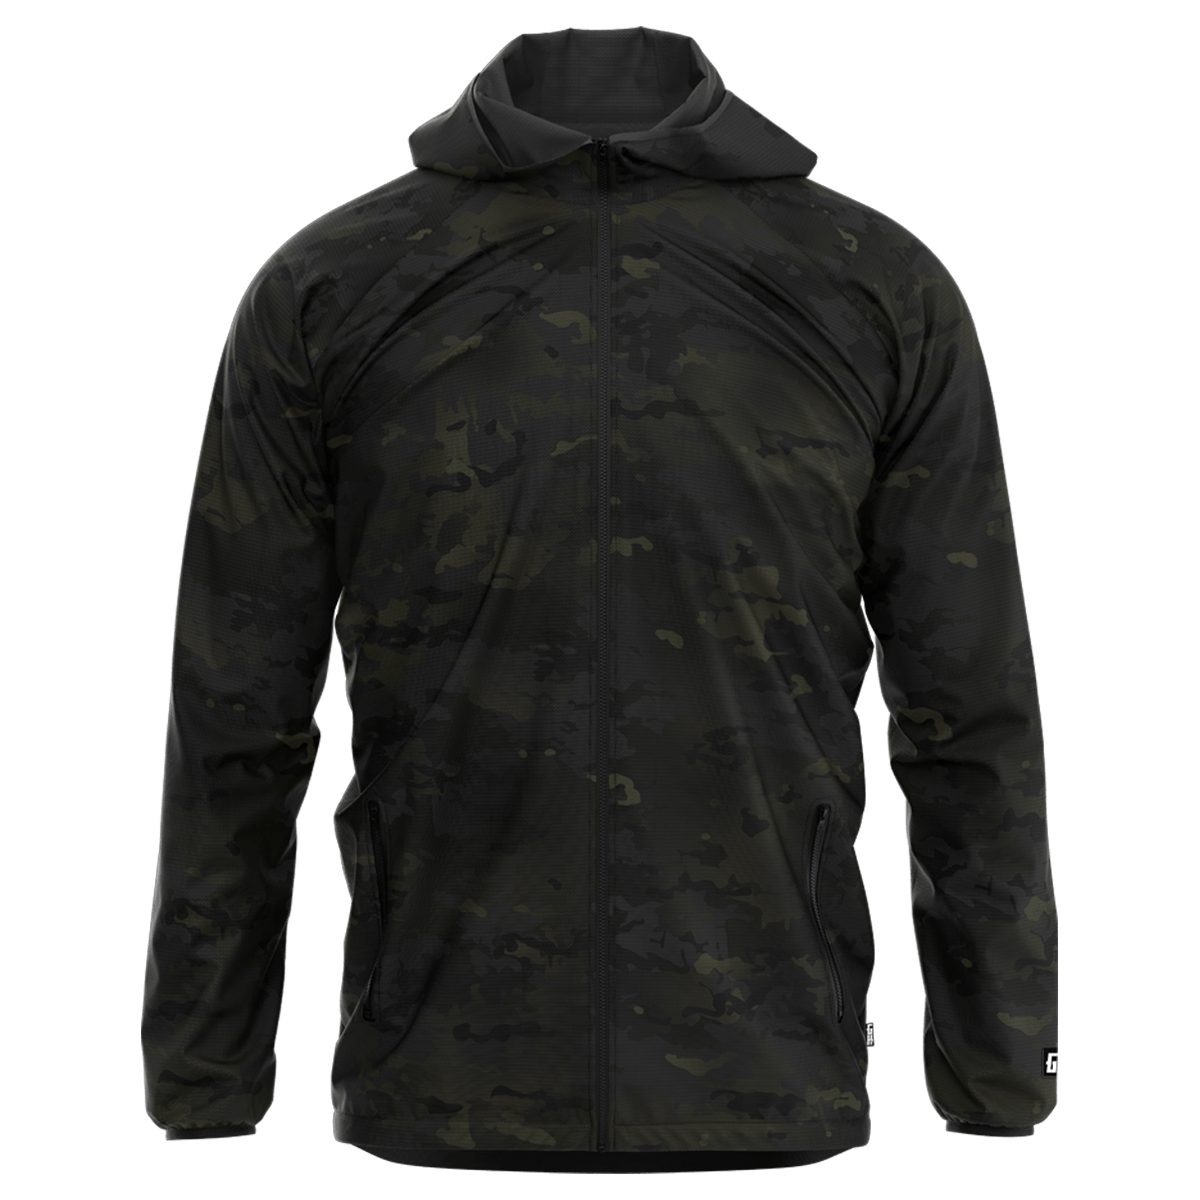 Night Ops Jacket - Greater Half